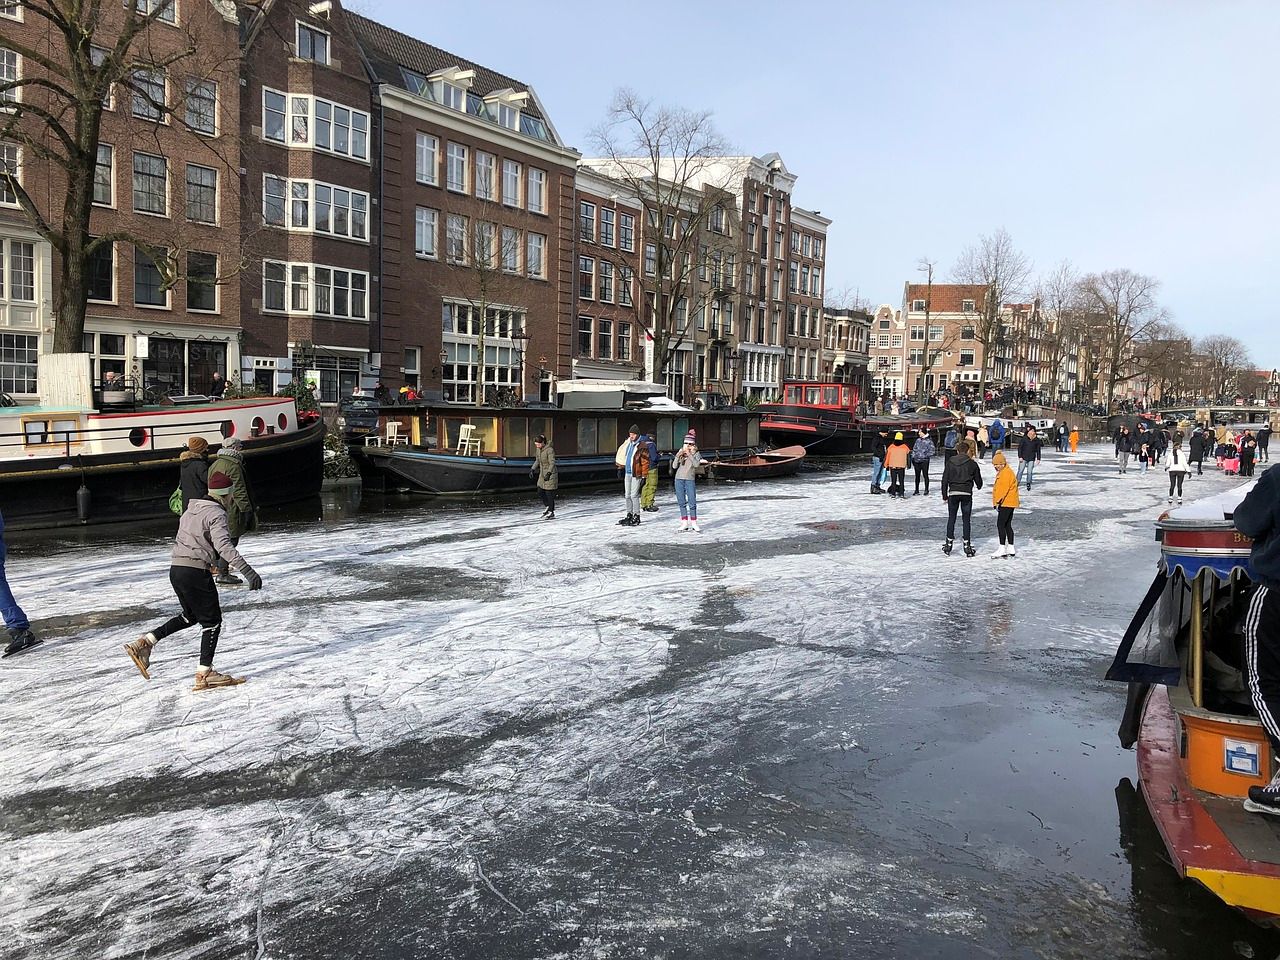 Ice skating in Amsterdam, the Netherlands